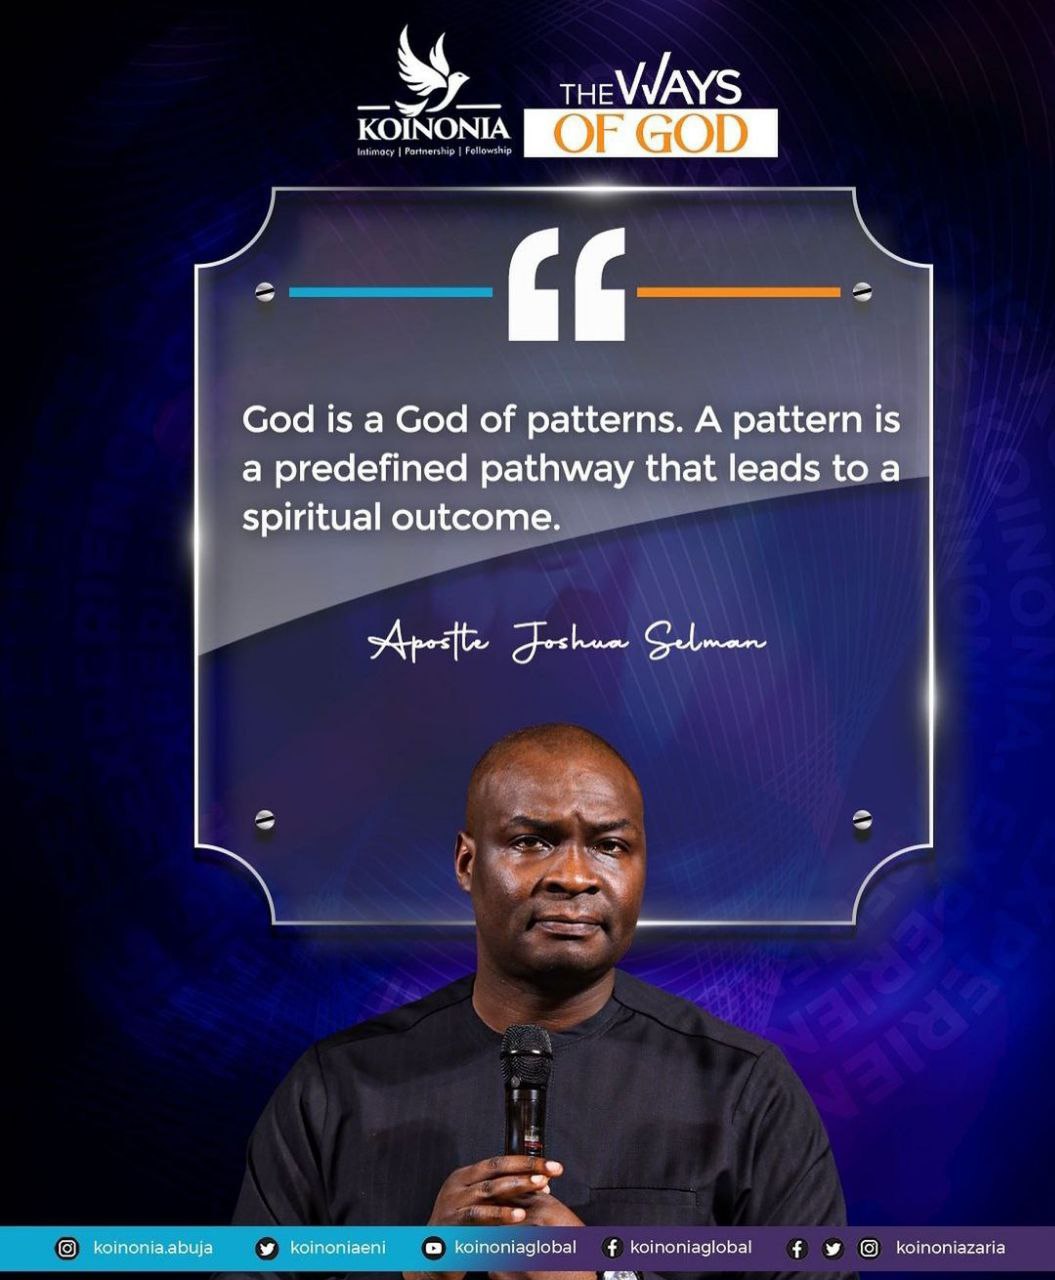 DOWNLOAD MP3: THE WAYS OF GOD by Apostle Joshua Selman (May 7, 2023) 8